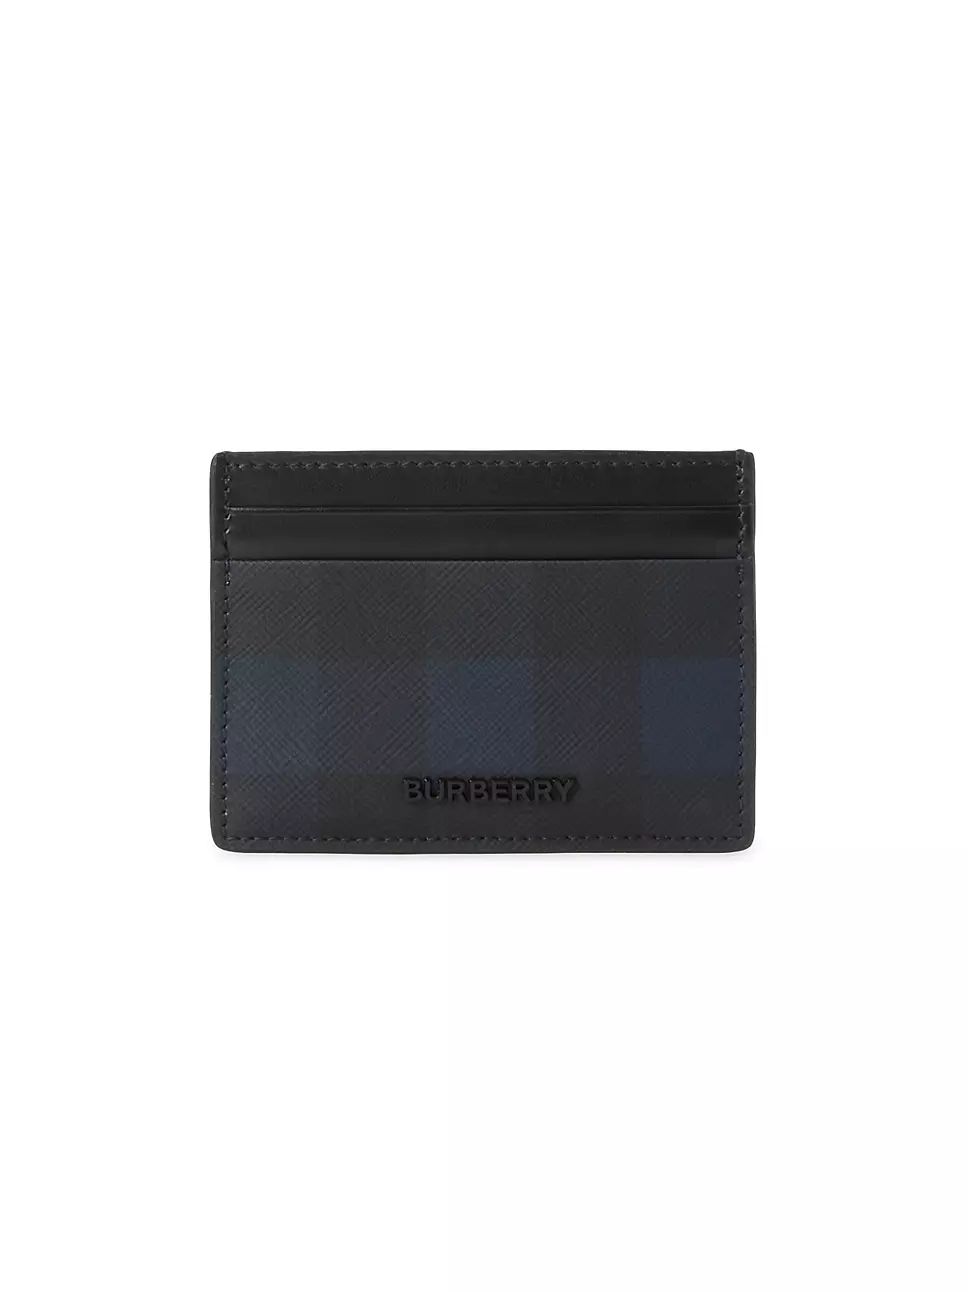 Burberry Sandon Check Leather-Trimmed Wallet | Saks Fifth Avenue